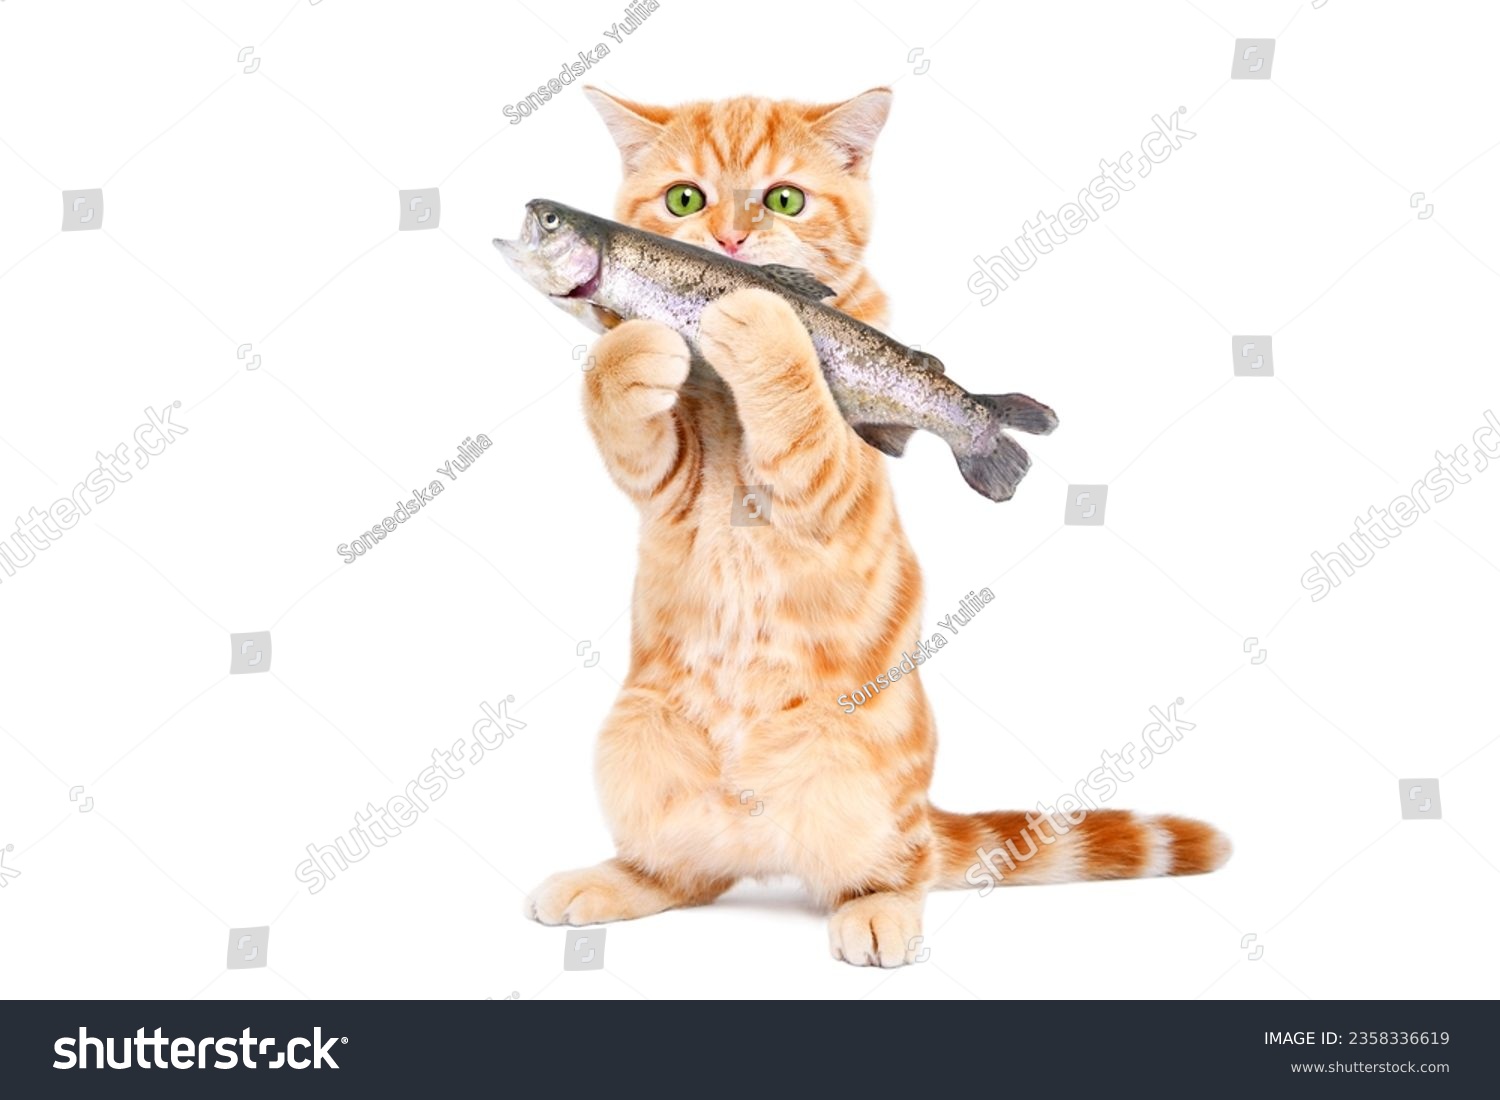 Playful kitten holding a fish in its paws standing isolated on a white background #2358336619